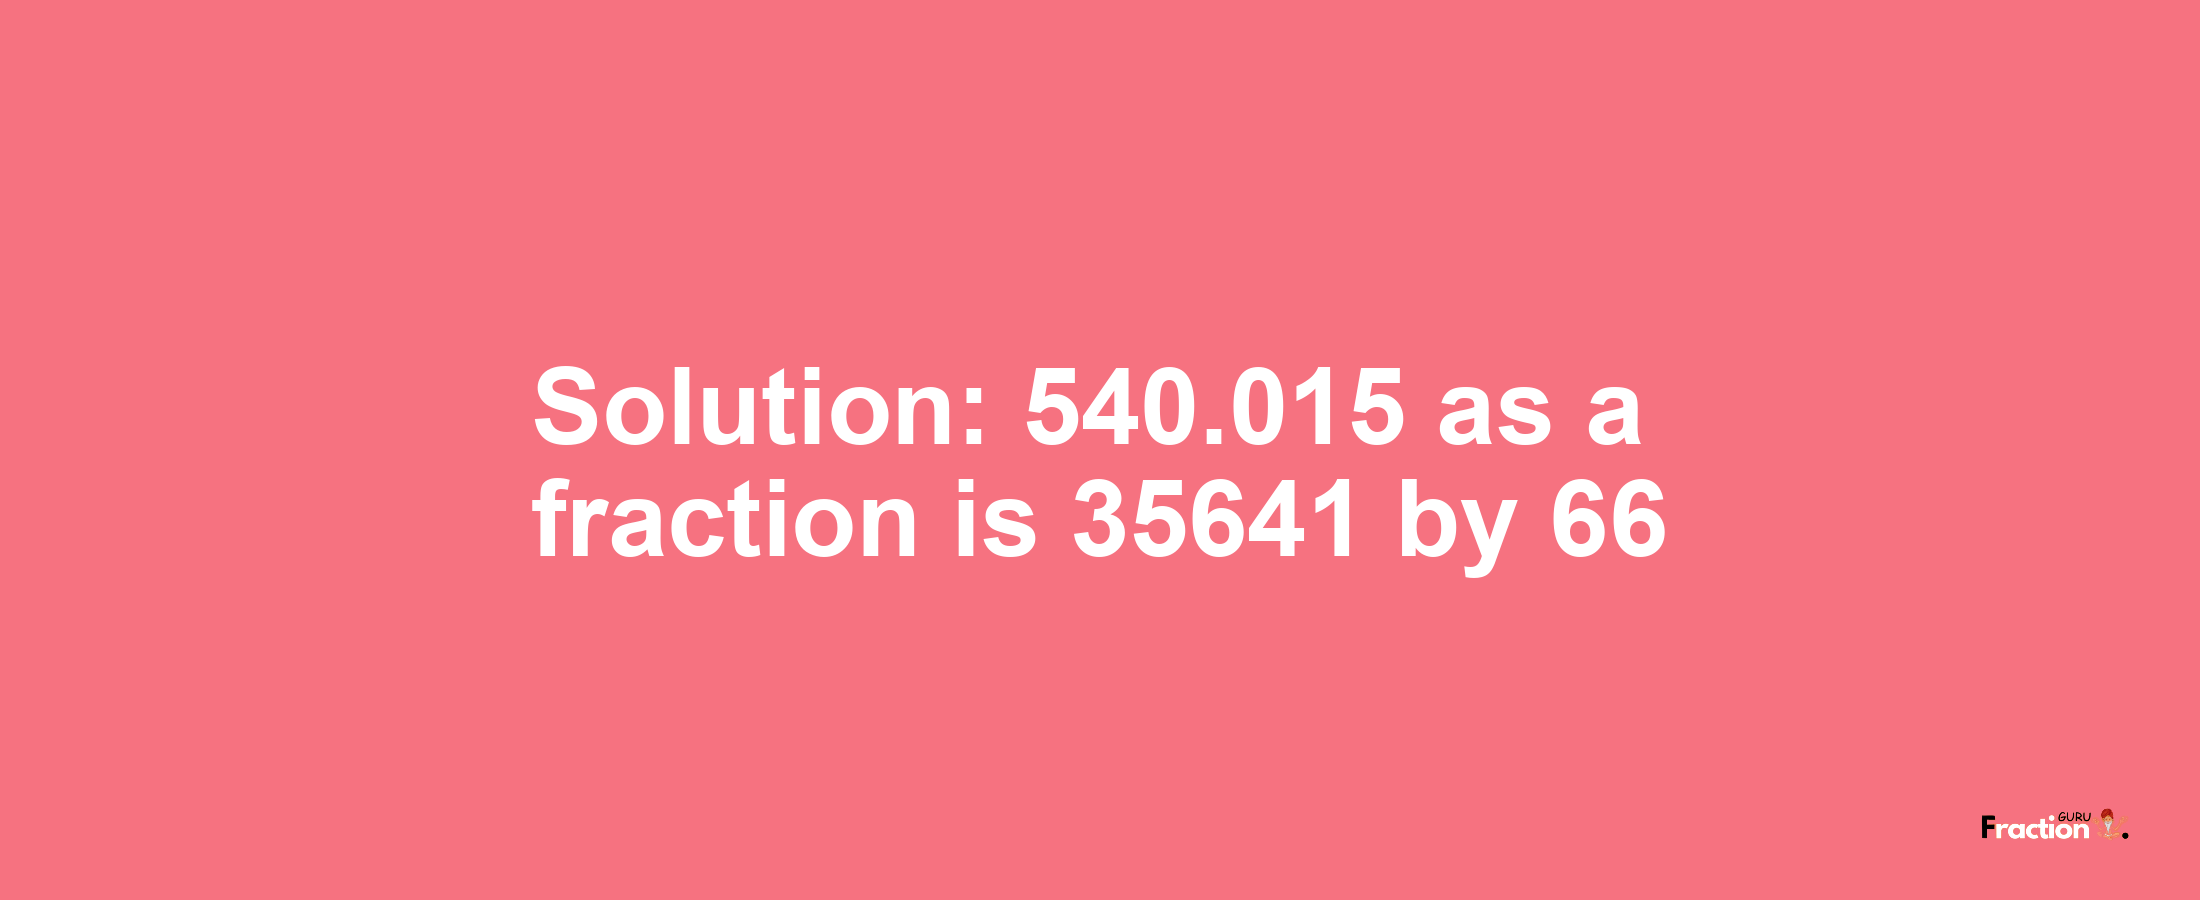 Solution:540.015 as a fraction is 35641/66